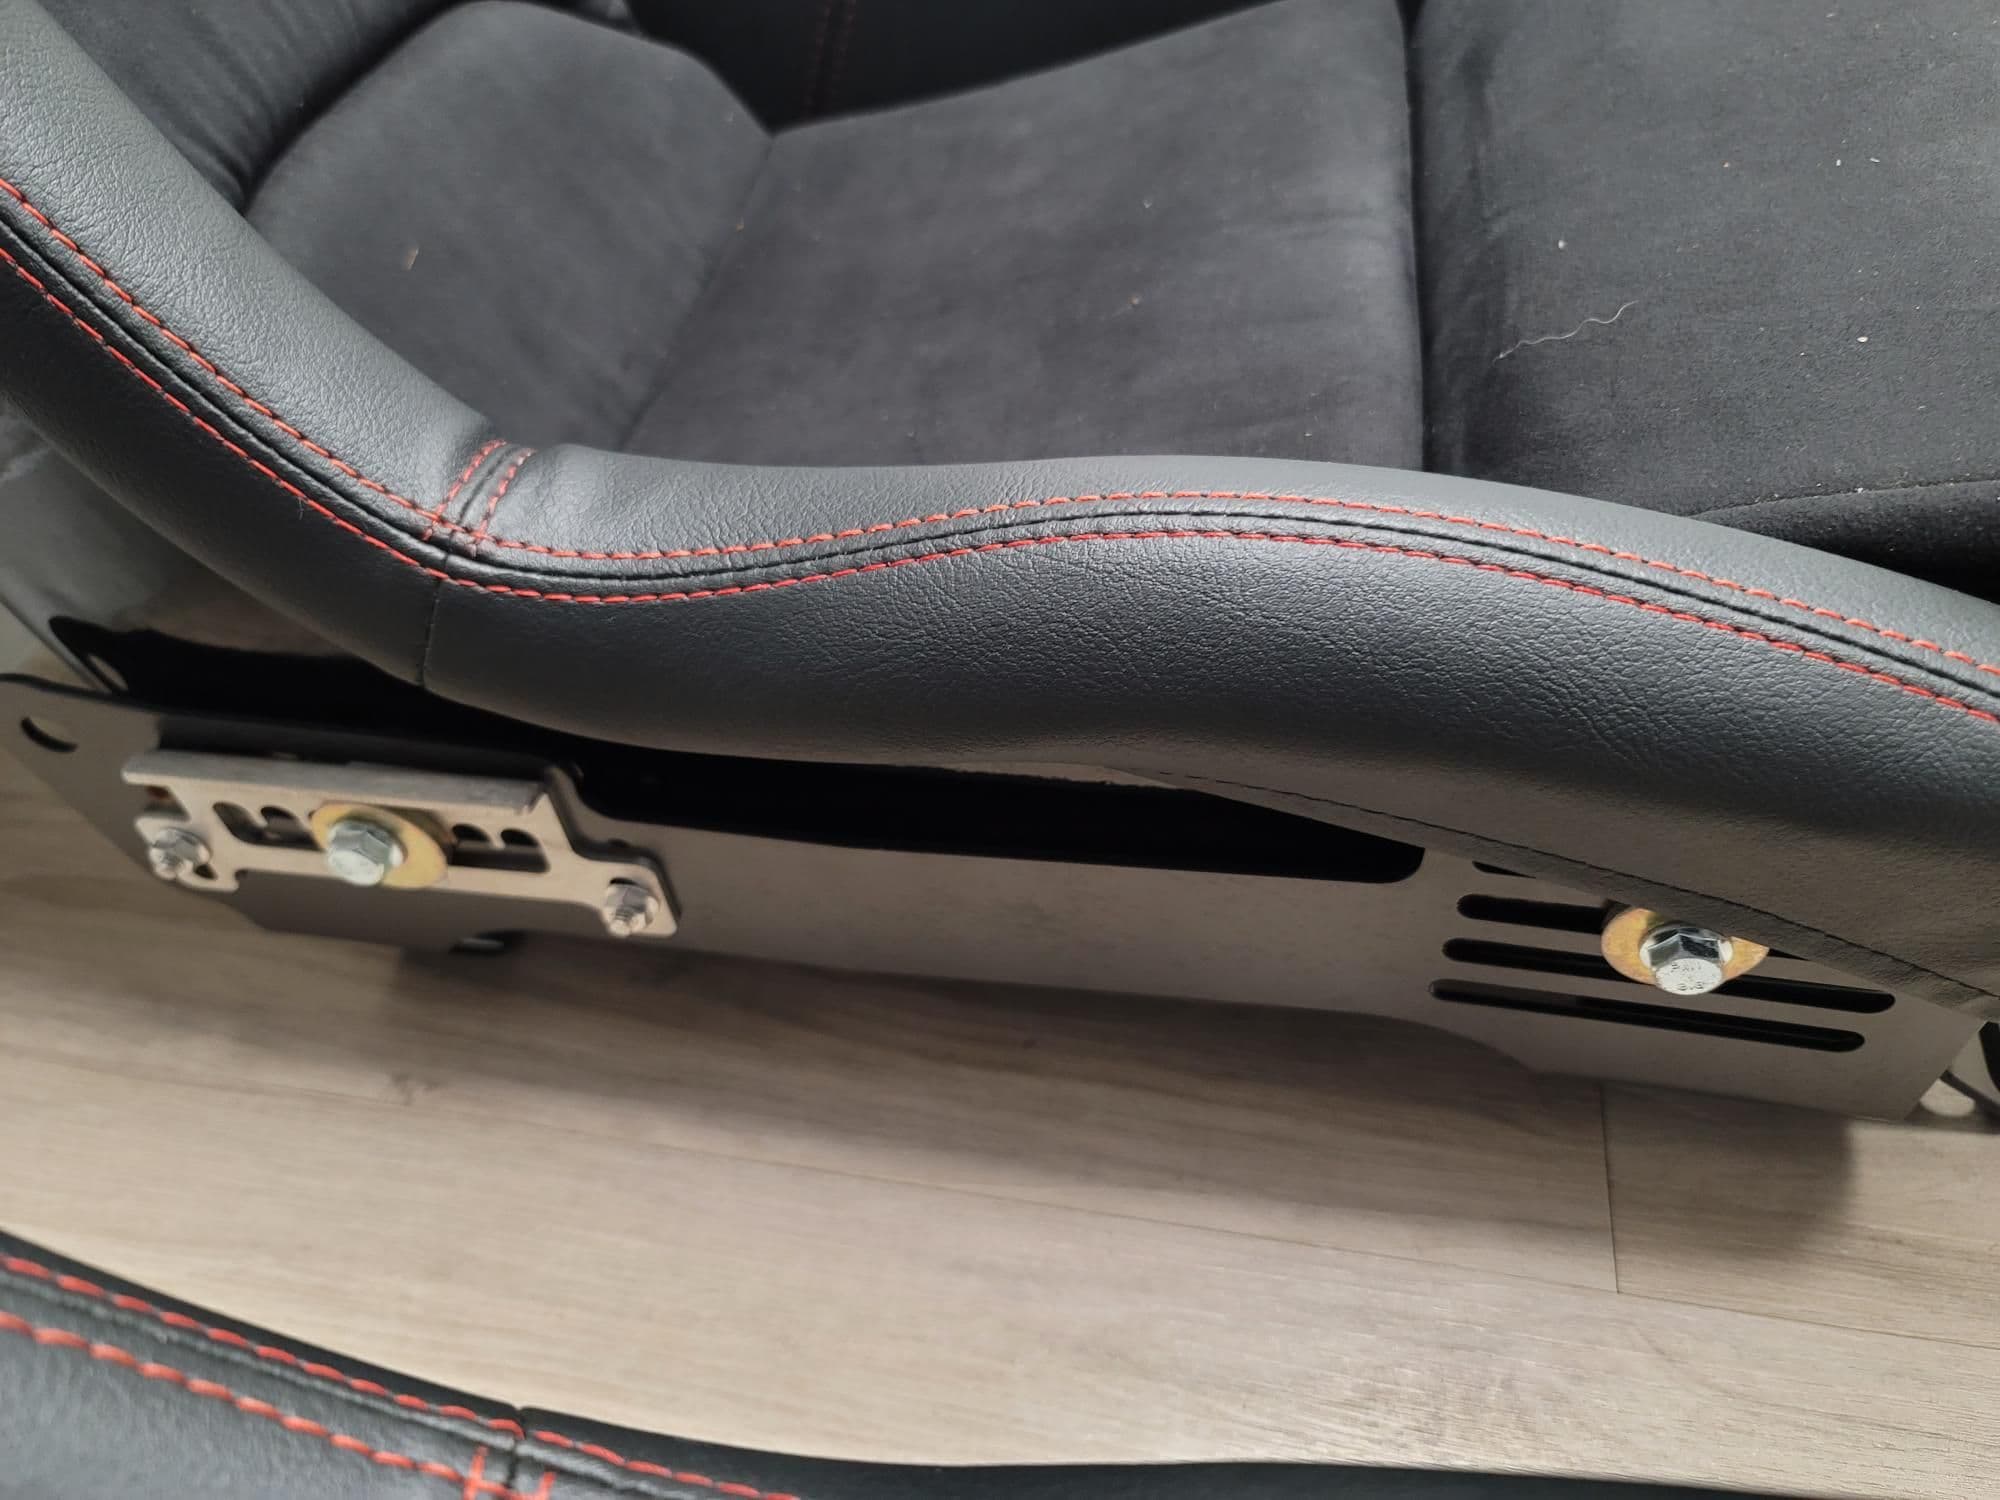 Interior/Upholstery - New Cobra Nogaro racing buckets with Garage Star adjustable bases for RX7 FD - New - 1993 to 1995 Mazda RX-7 - Miami, FL 33126, United States